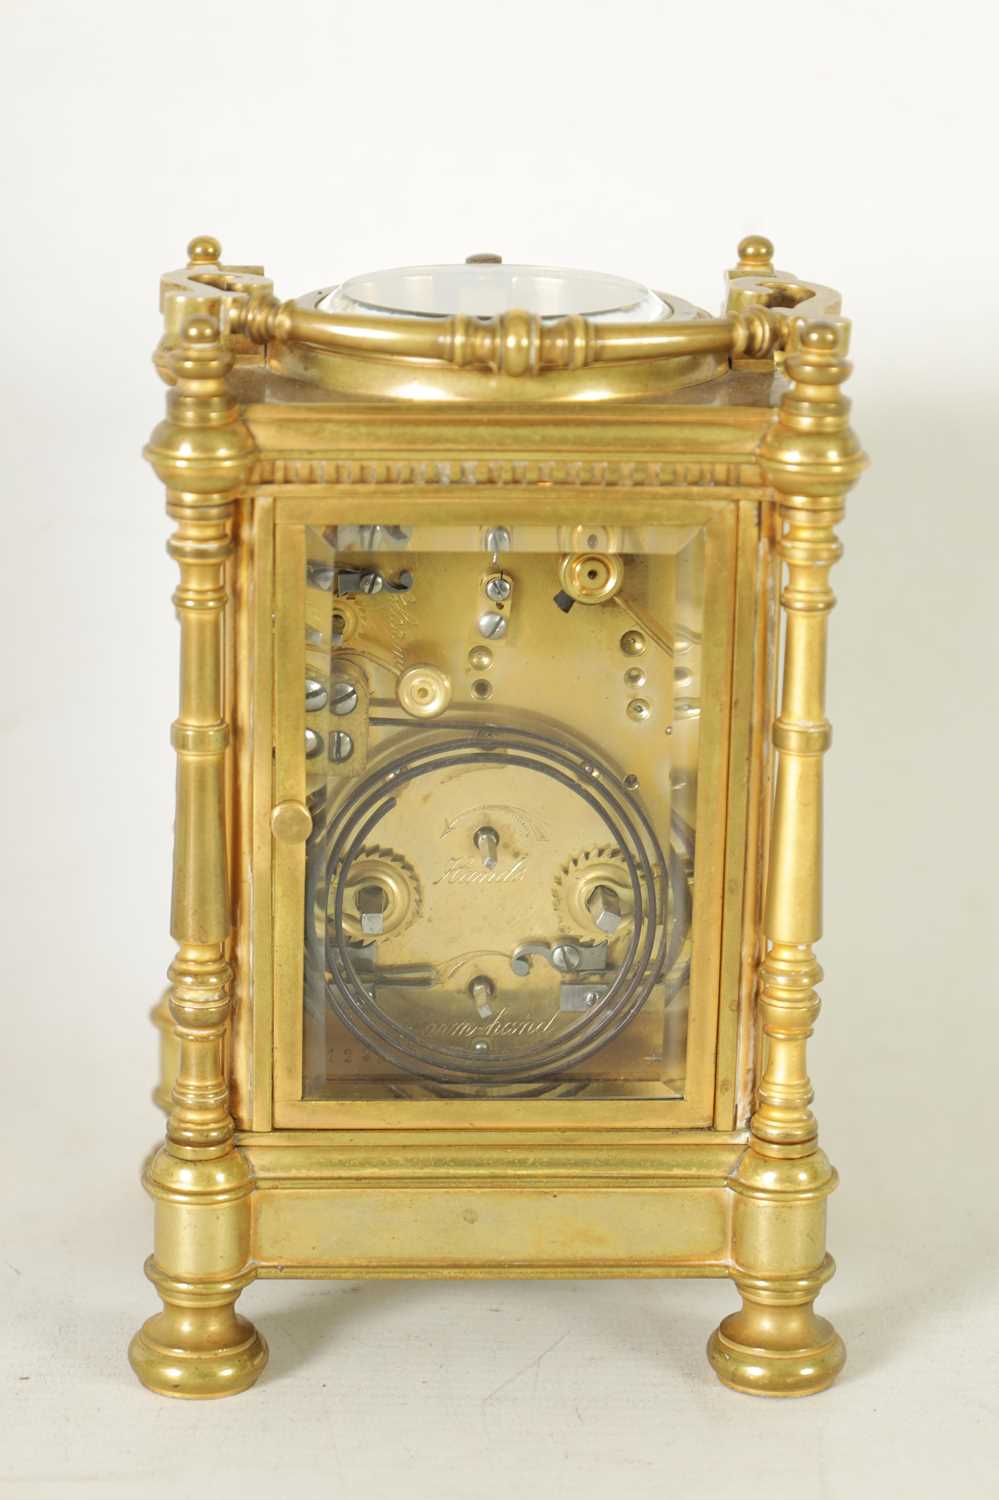 A LARGE LATE 19TH CENTURY FRENCH REPEATING CARRIAGE CLOCK - Image 8 of 12